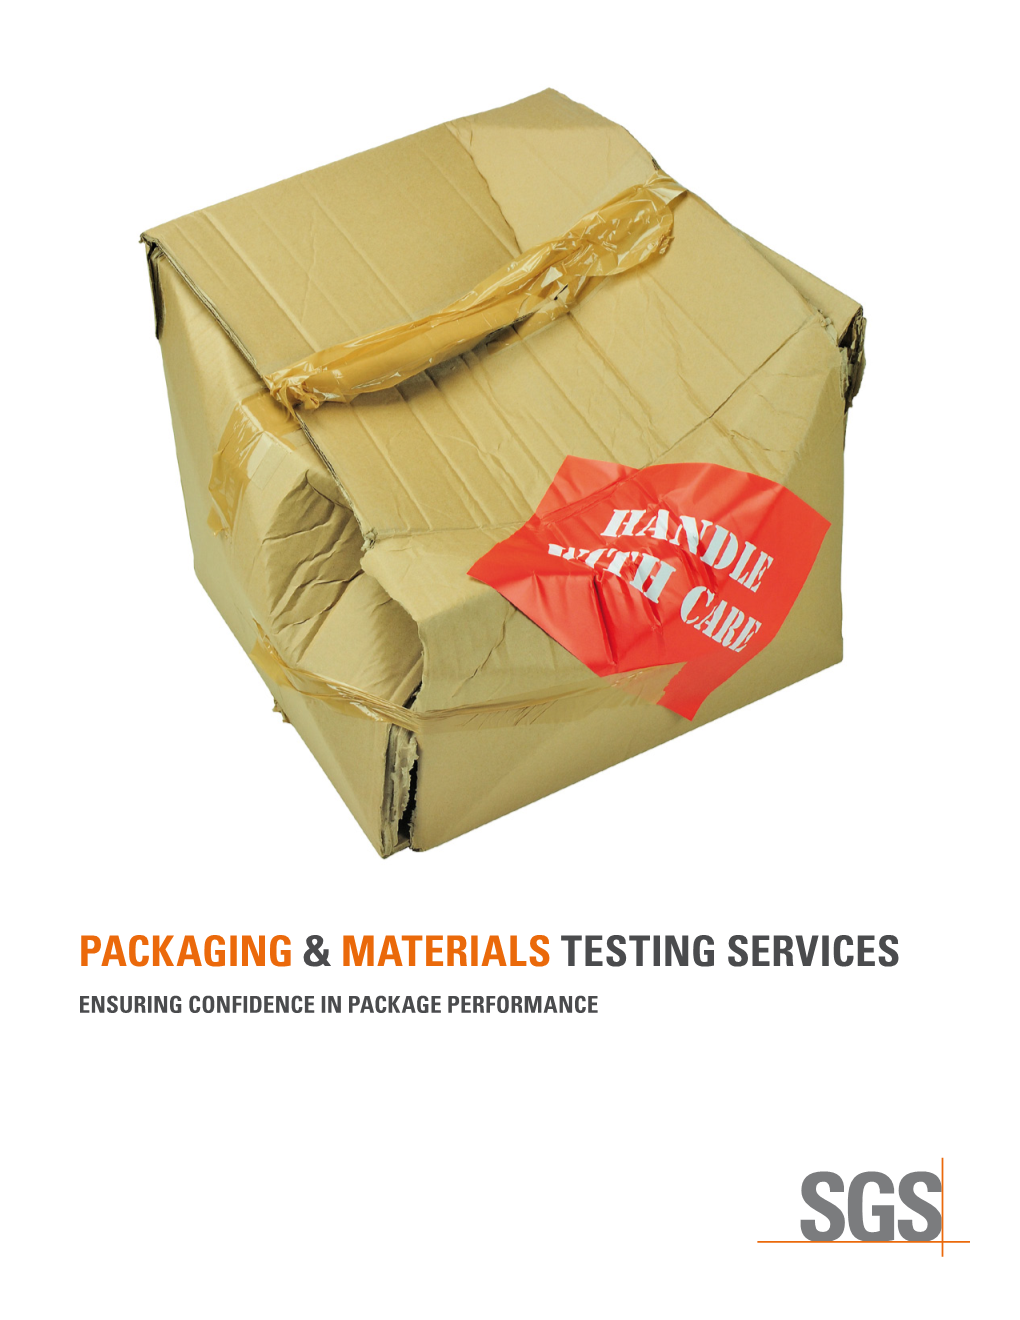 SGS Packaging and Materials Testing Brochure